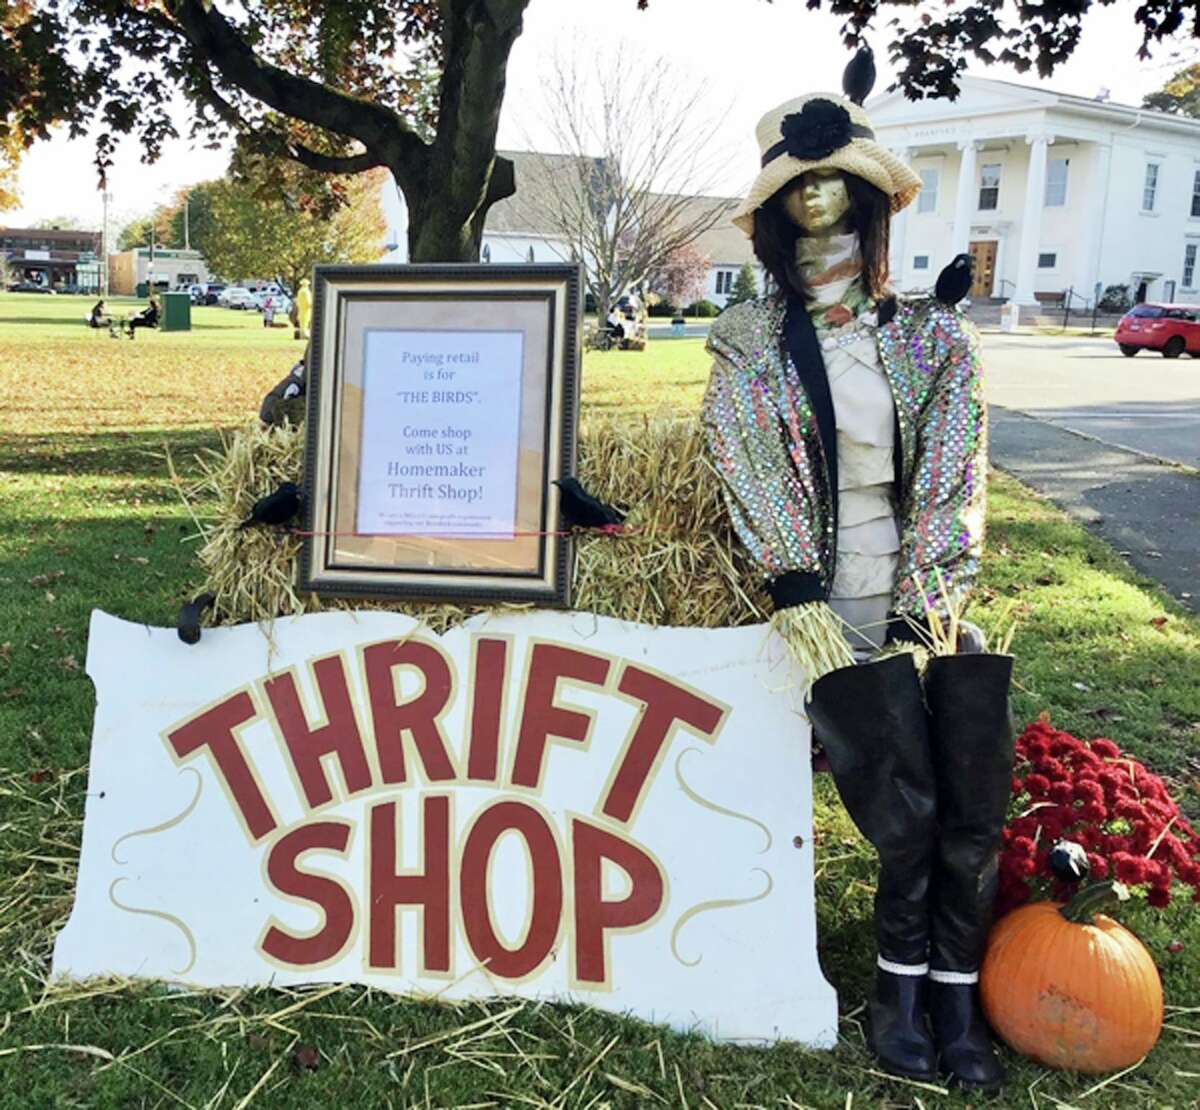 A scarecrow from the Homemaker Thrift Shop from a previous Scarecrows on the Green event.